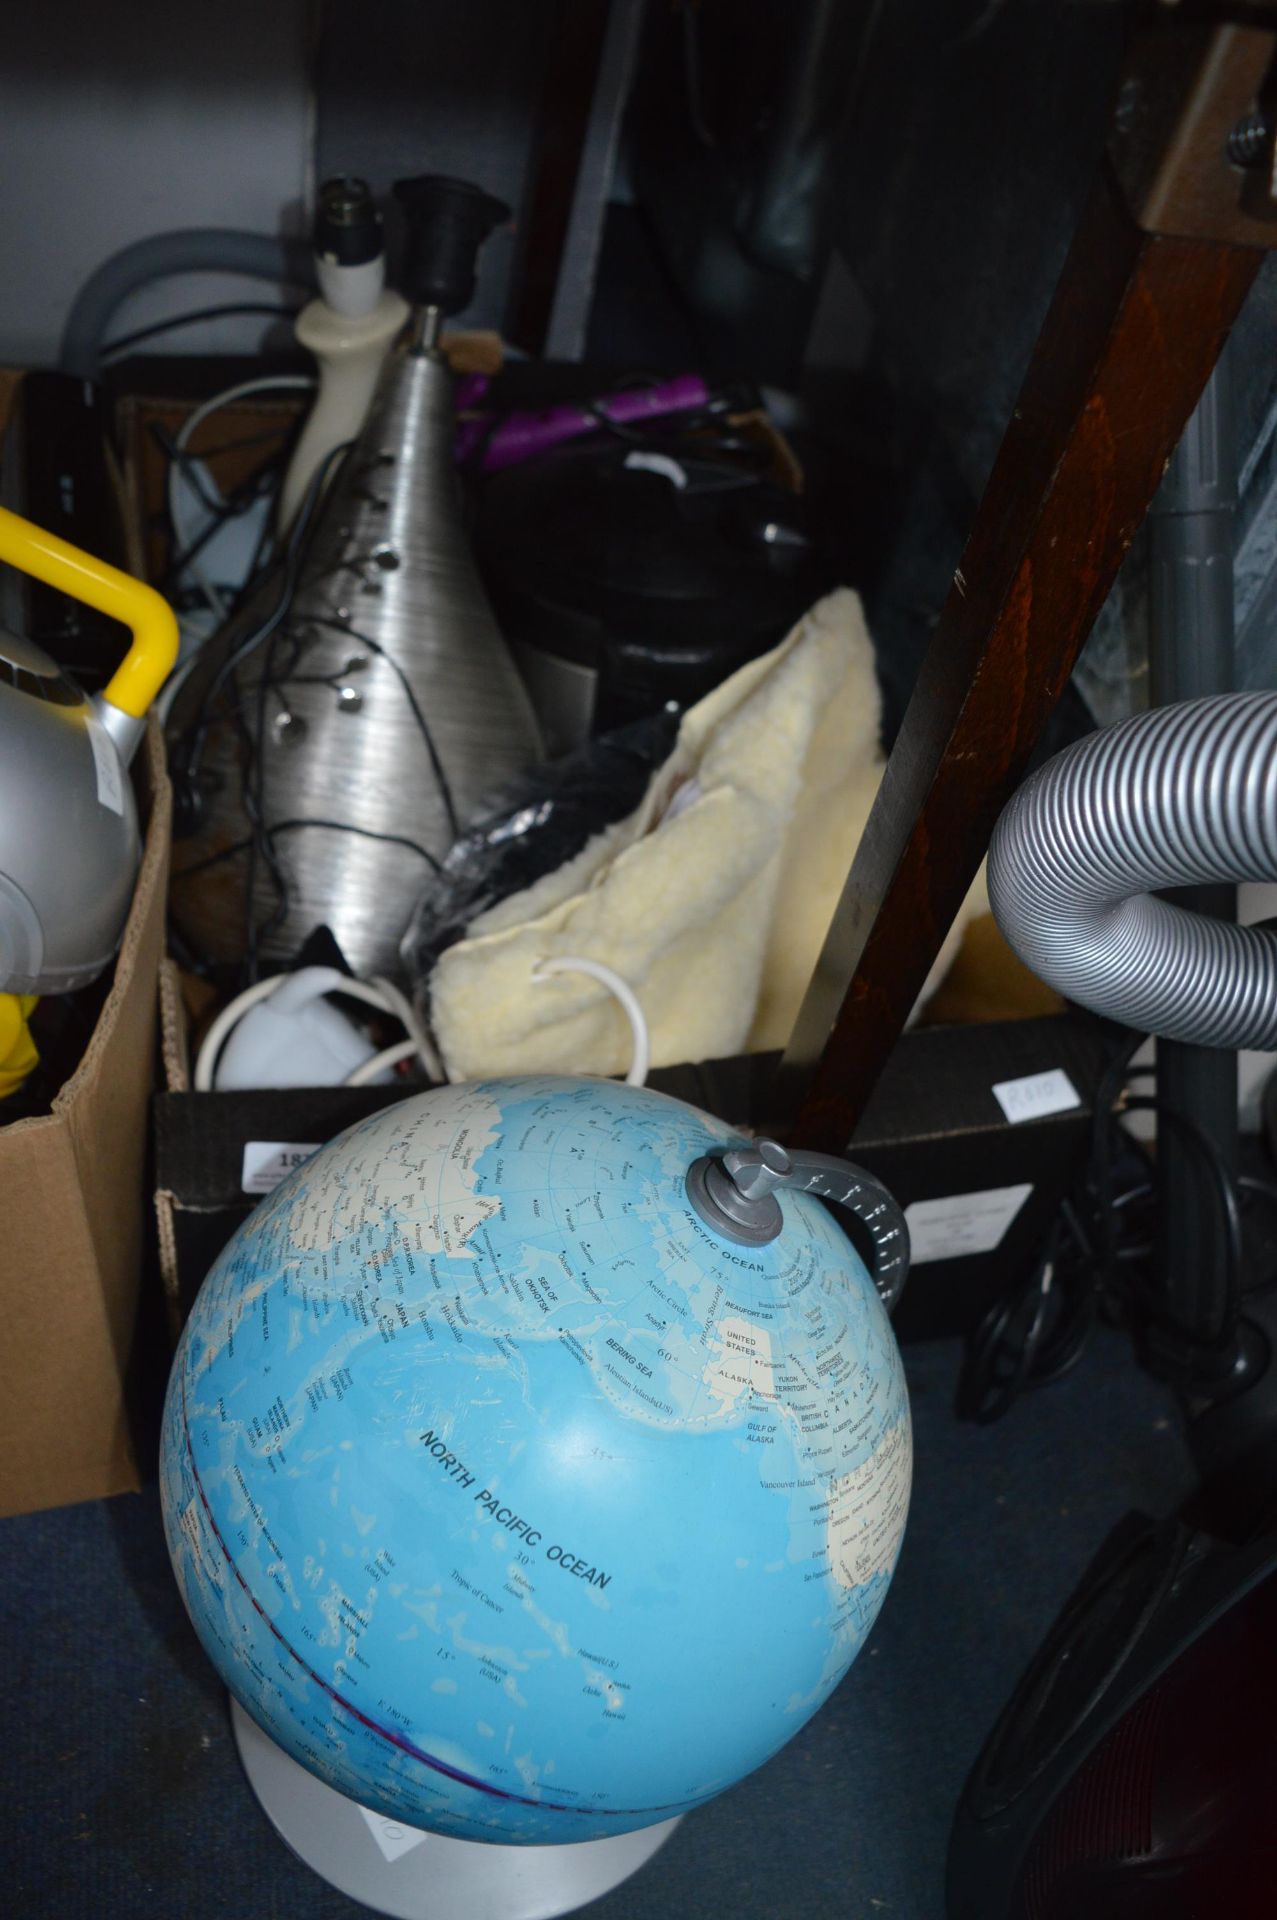 Box of Electricals Including Lamps, Globe, etc.